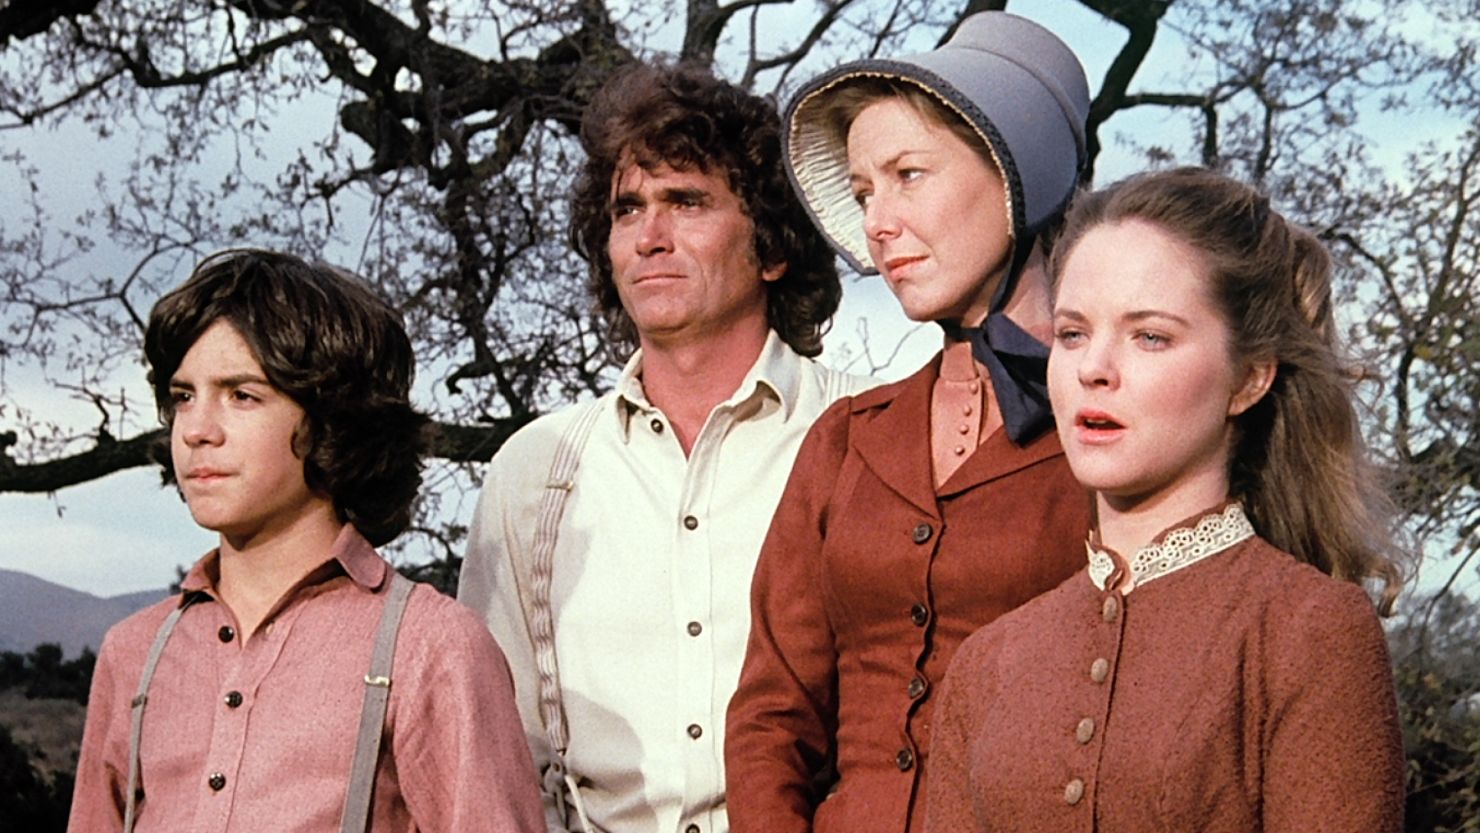 Matthew Labyorteaux (Albert), Michael Landon (Pa), Karen Grassle (Ma) and Melissa Sue Anderson (Mary) starred in the TV version of "Little House on the Prairie." Not pictured: Melissa Gilbert (Laura). 